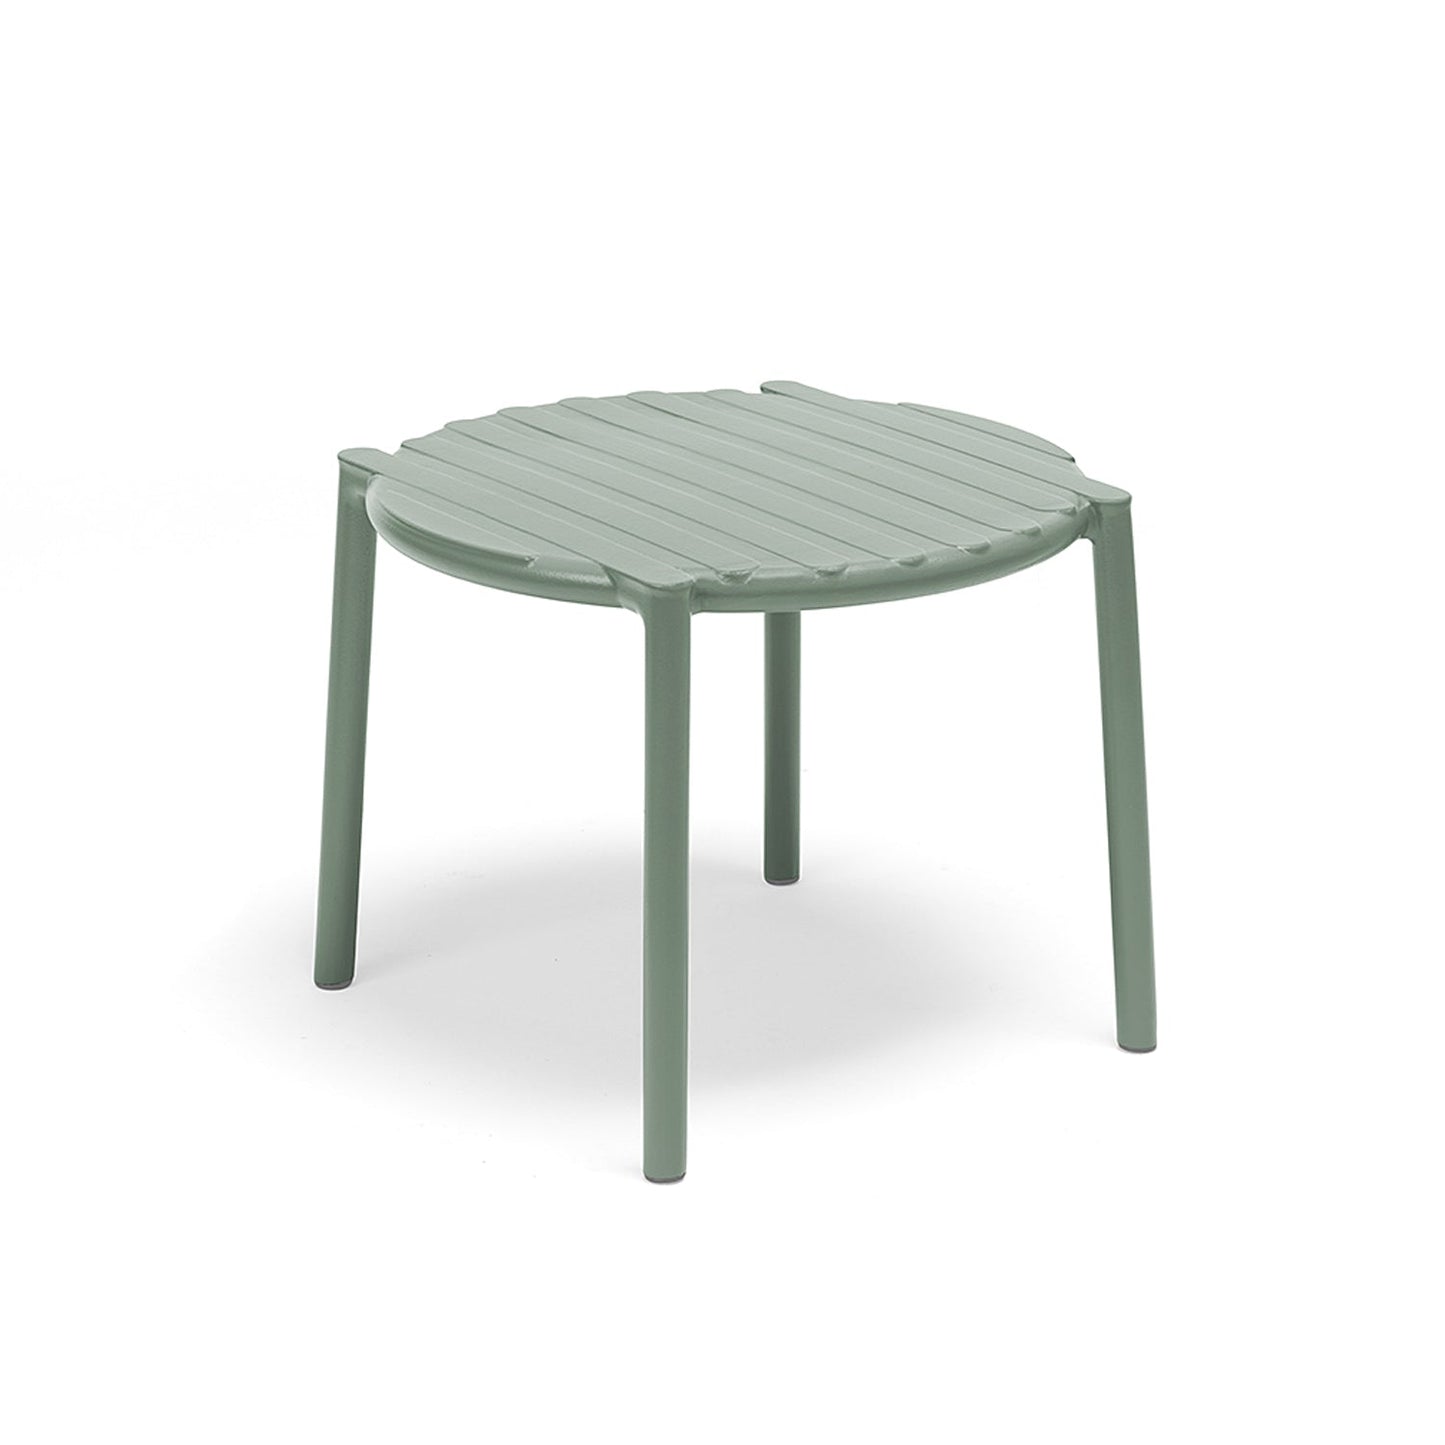 Doga Table in Mint